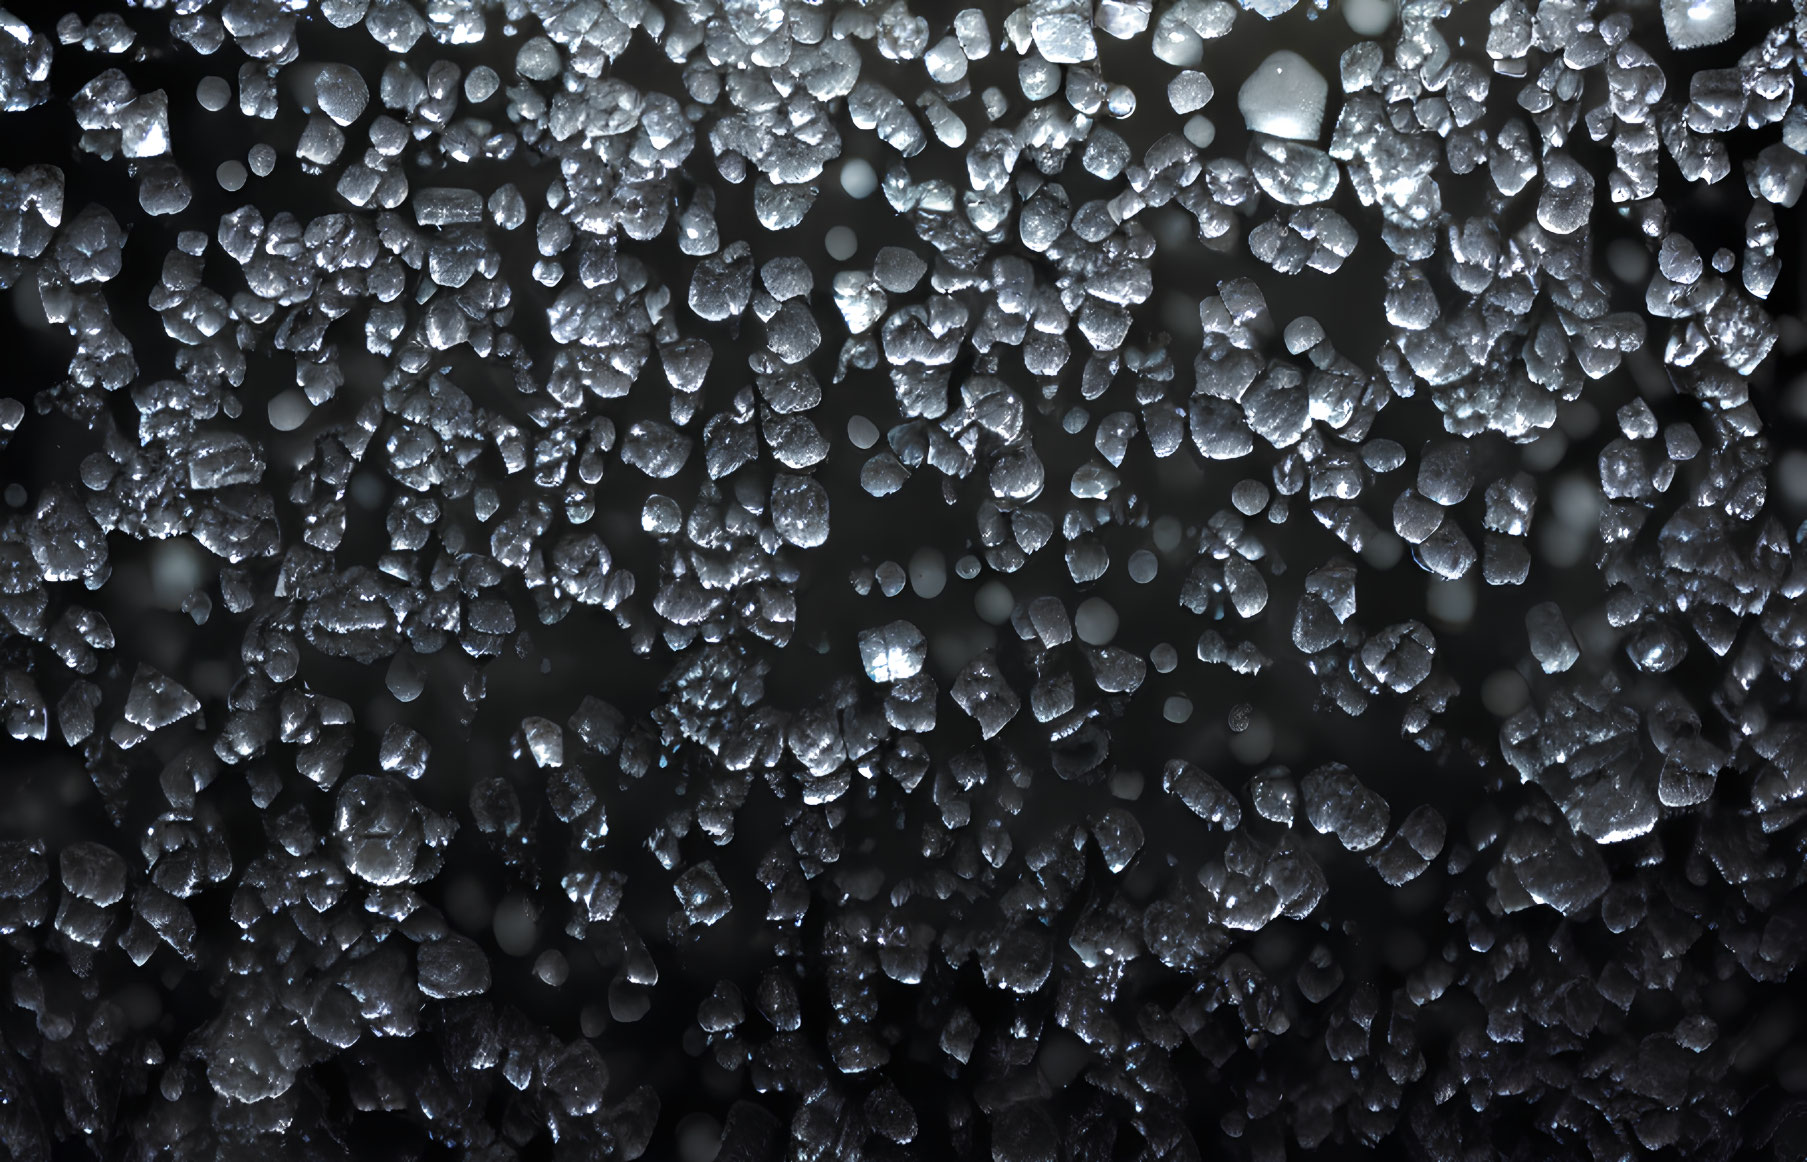 Frozen Water Droplets on Dark Background: Abstract and Dynamic Texture